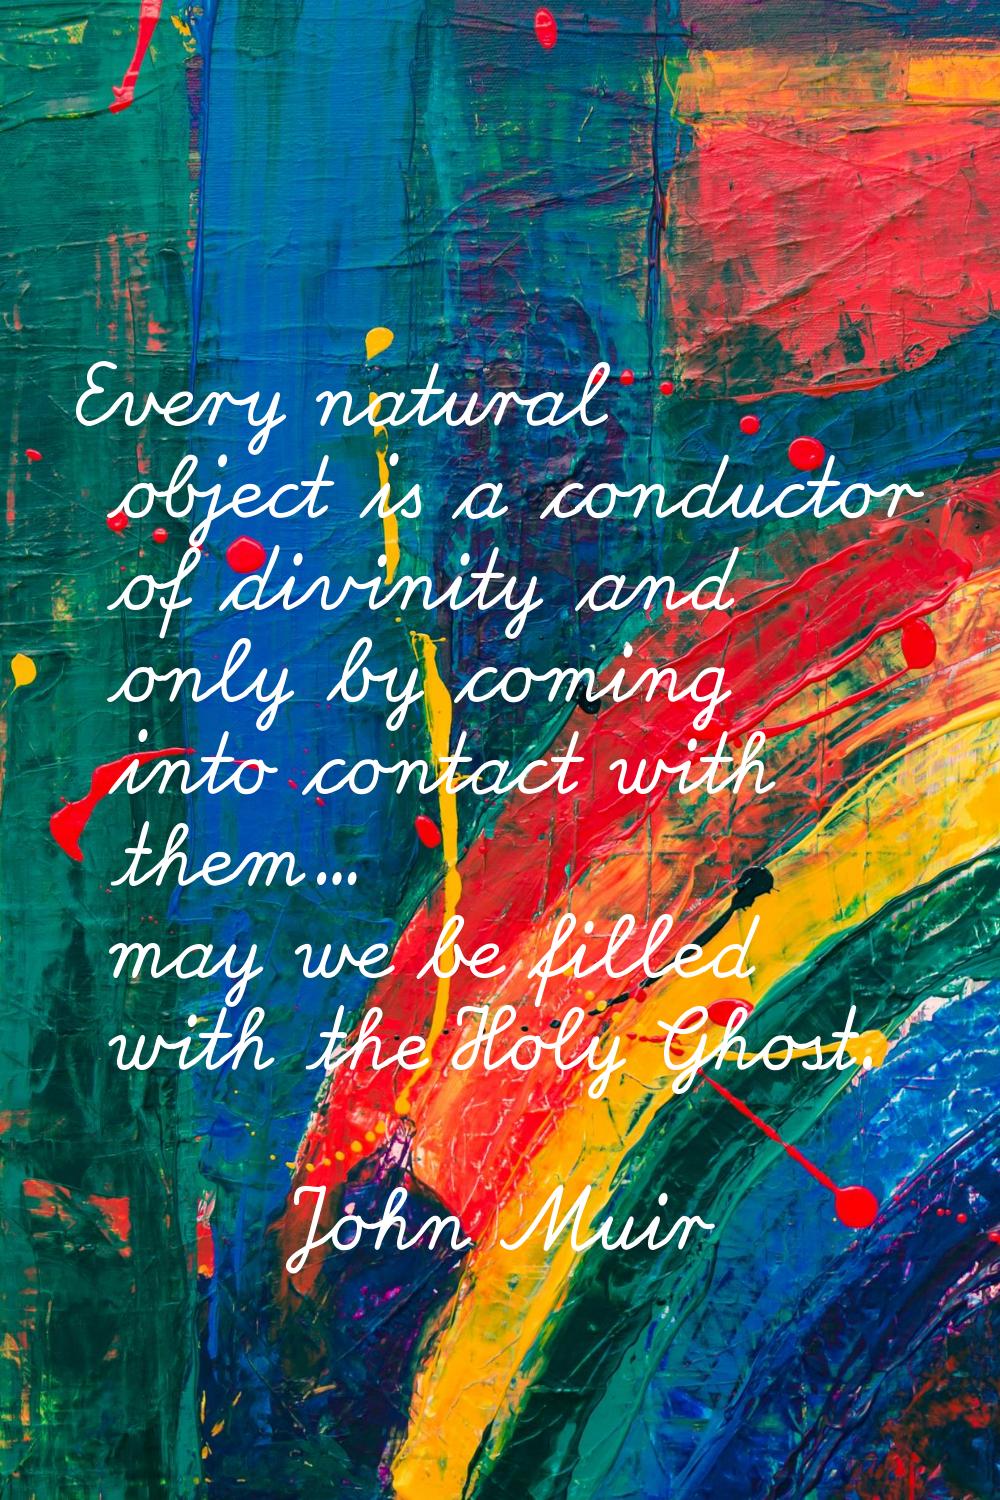 Every natural object is a conductor of divinity and only by coming into contact with them... may we